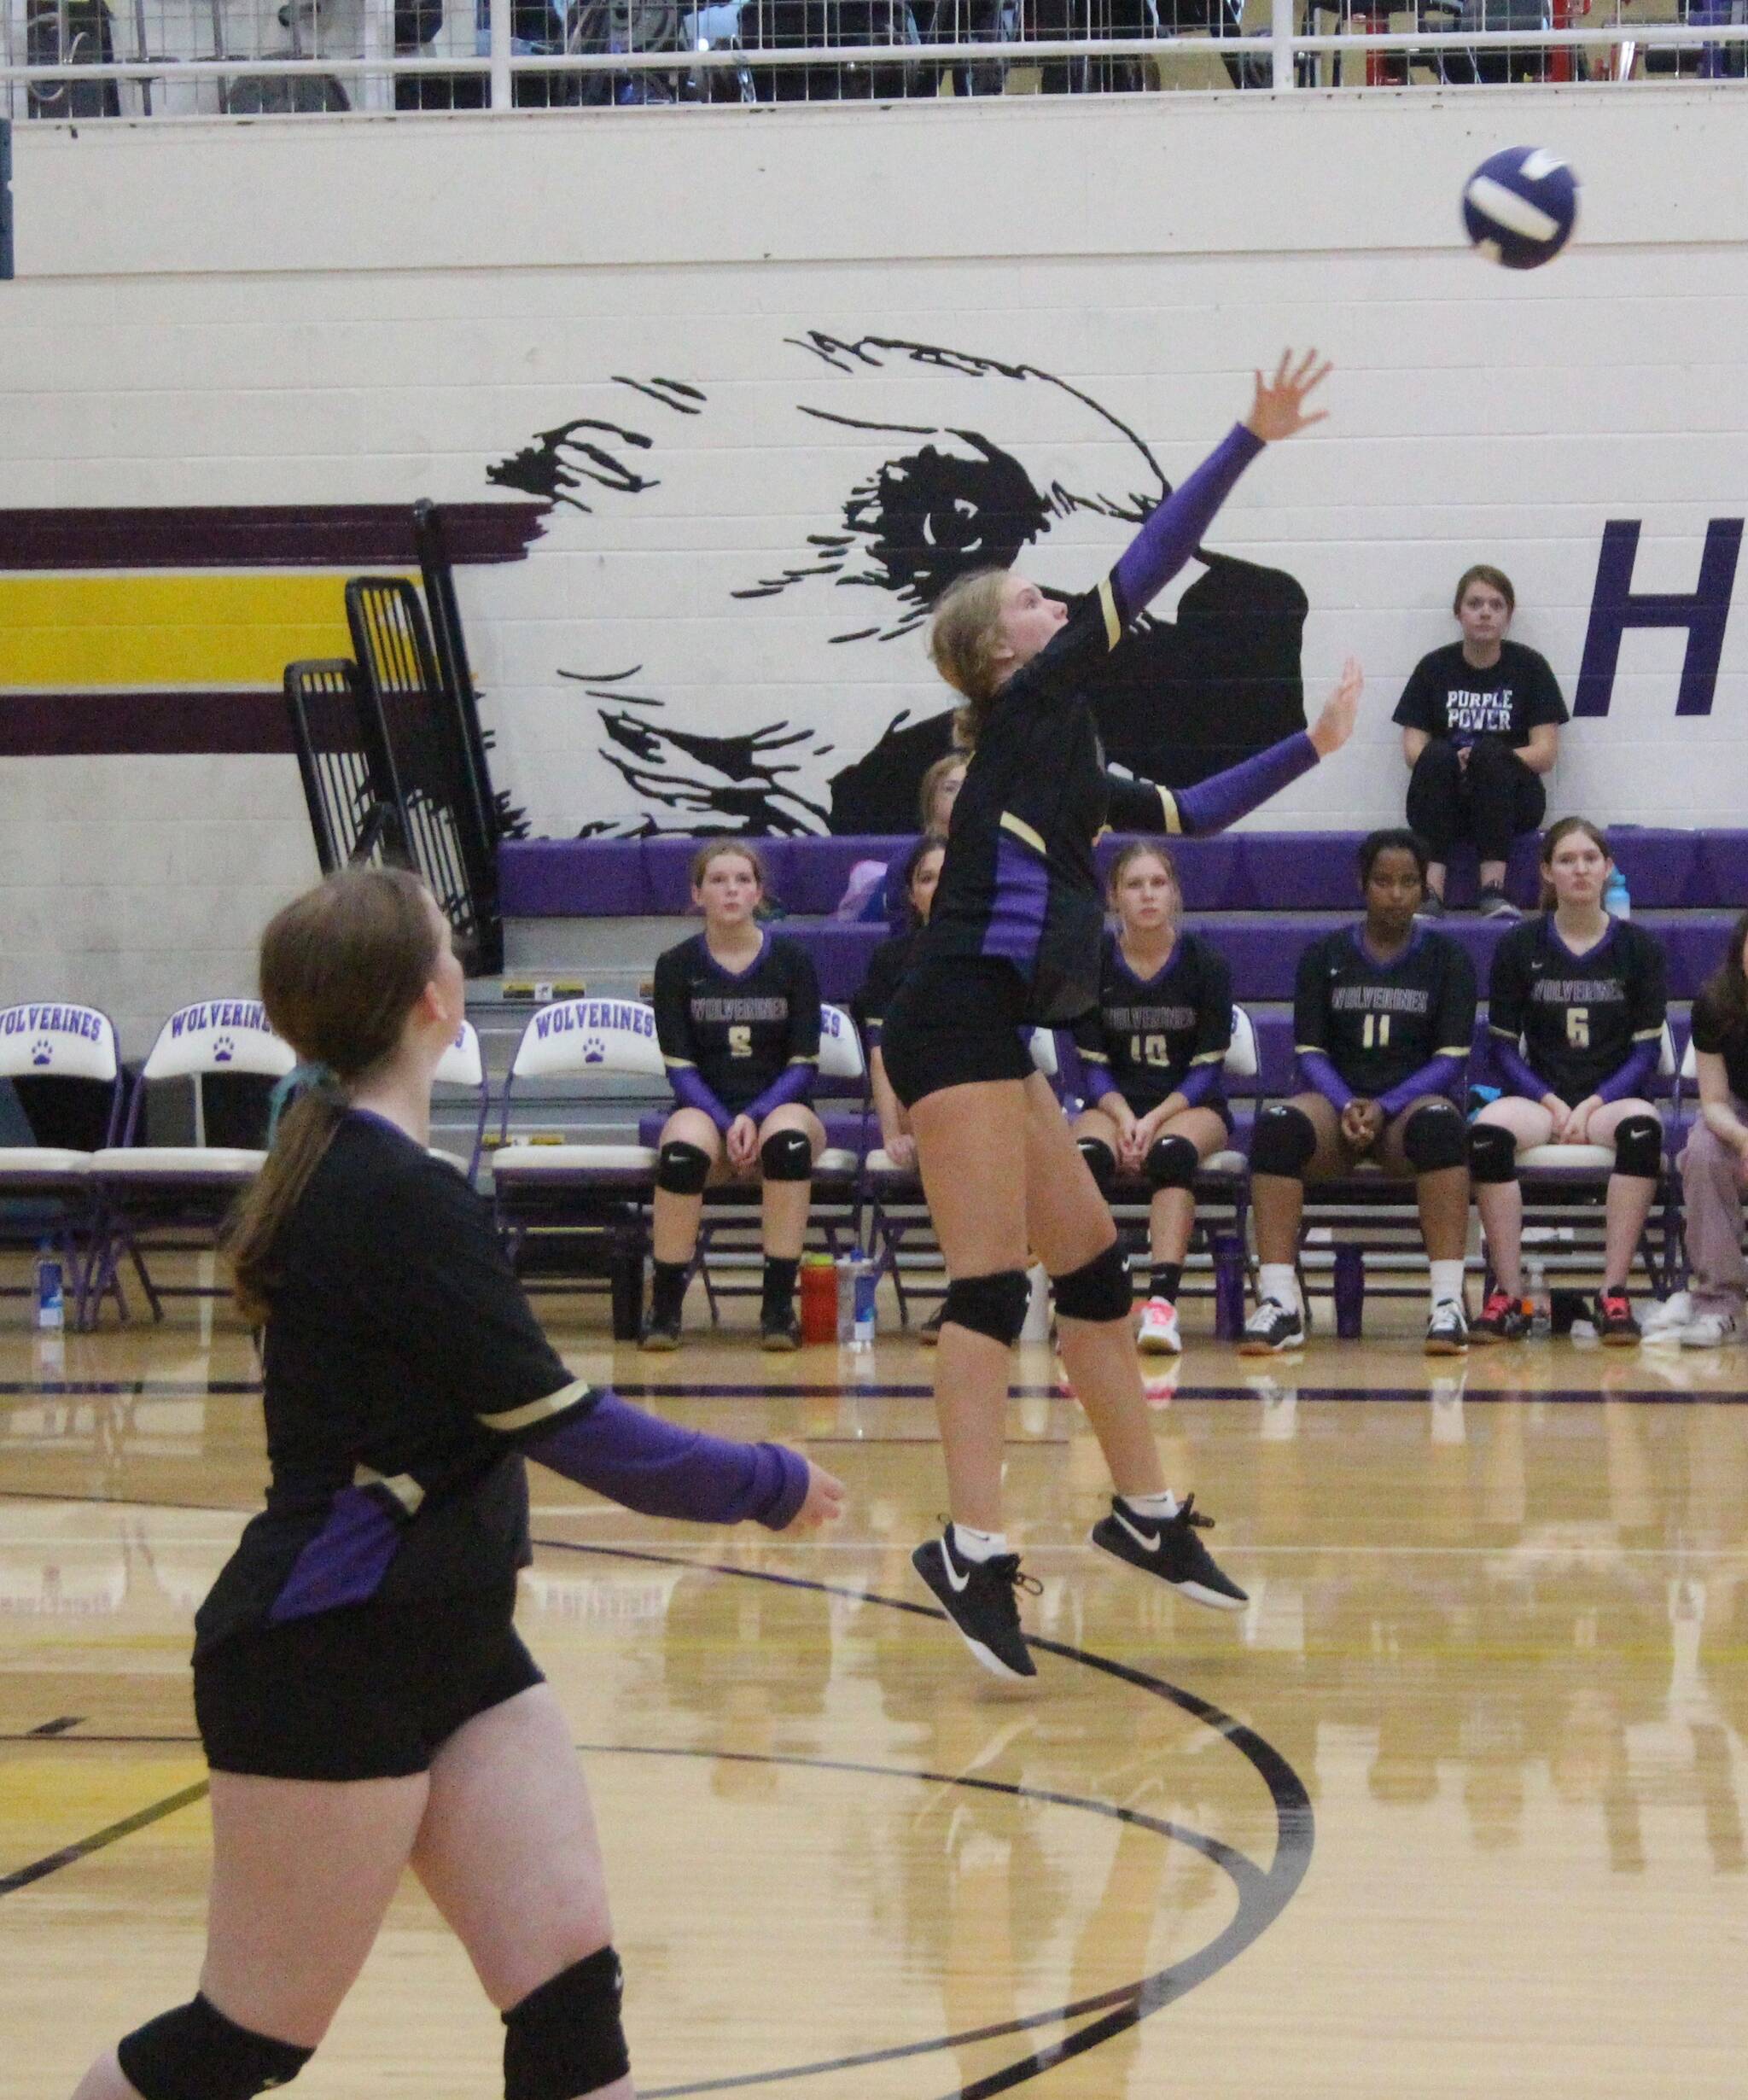 Heather Spaulding \ Staff photo
Esme Smith powers the ball over the net.